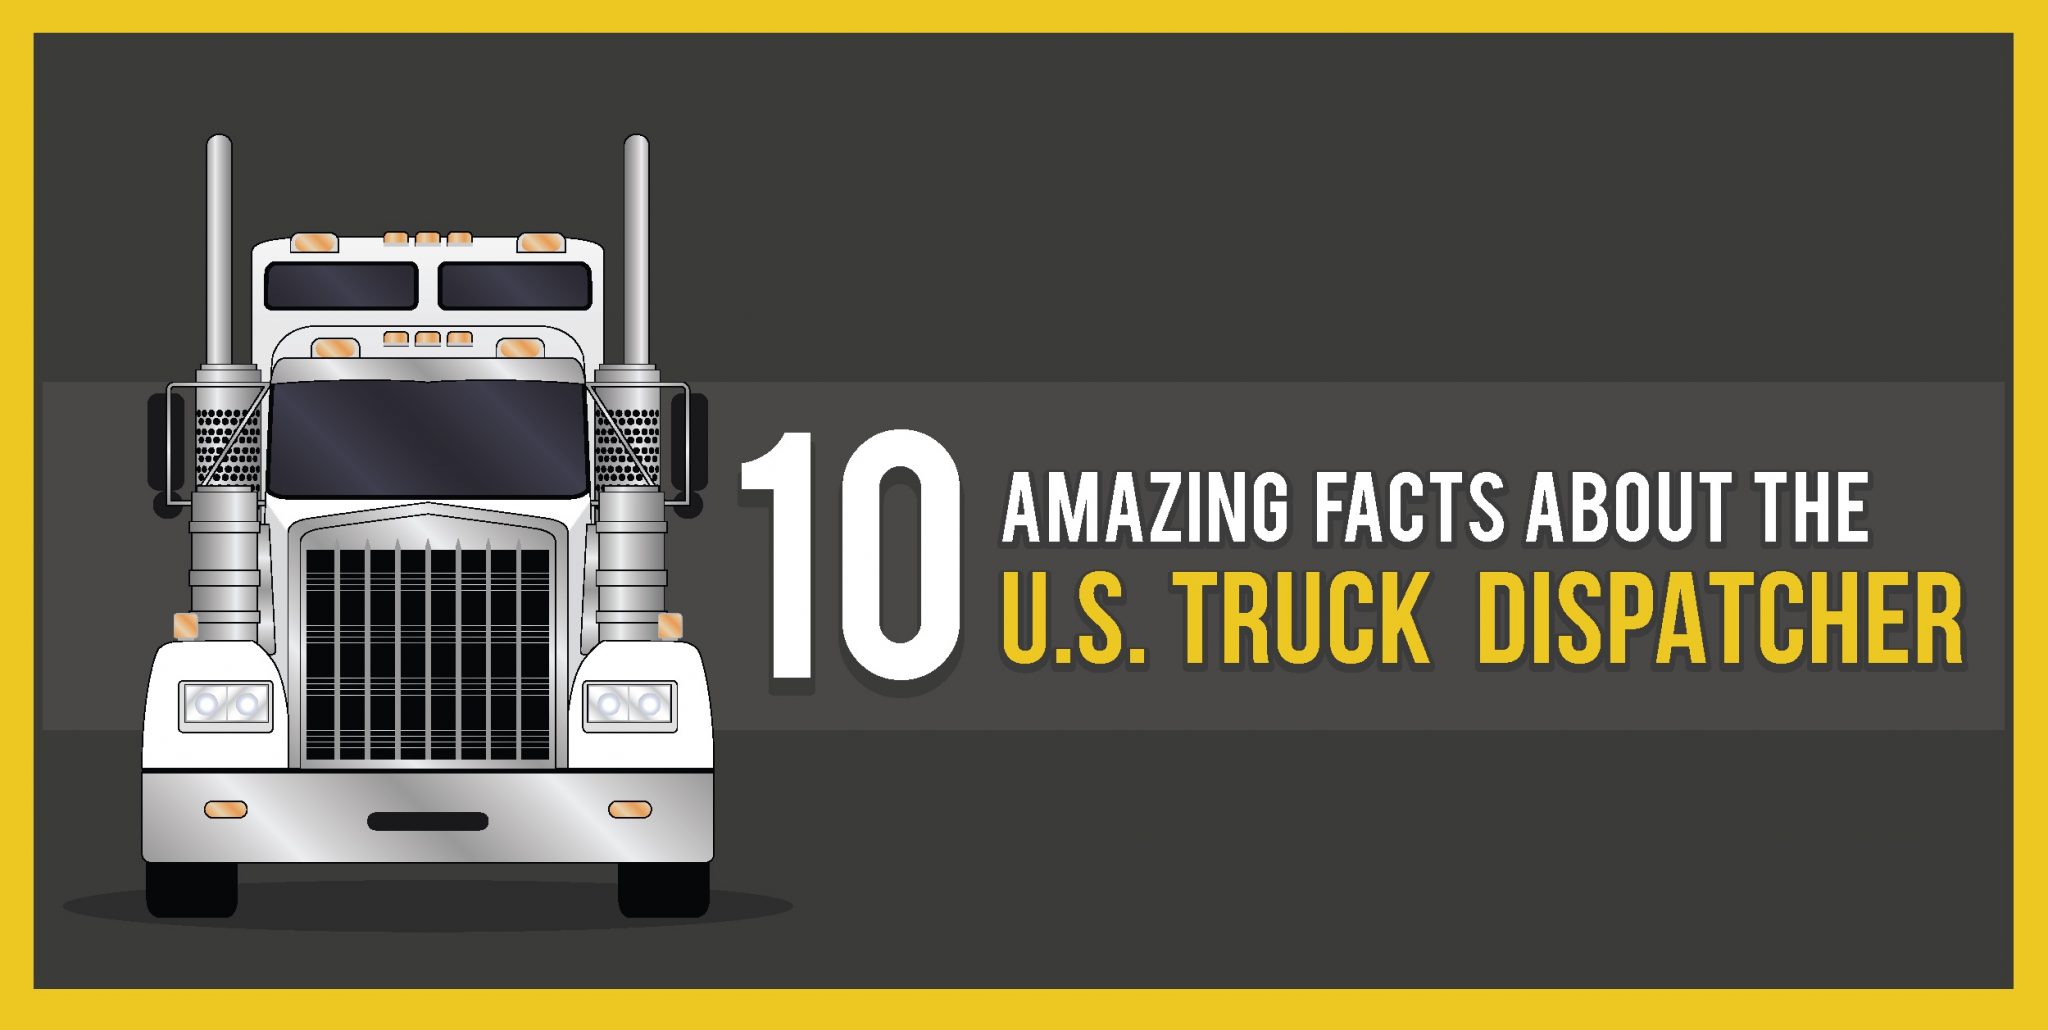 INFOGRAPHIC: 10 Amazing Facts About the U.S. Truck Dispatcher